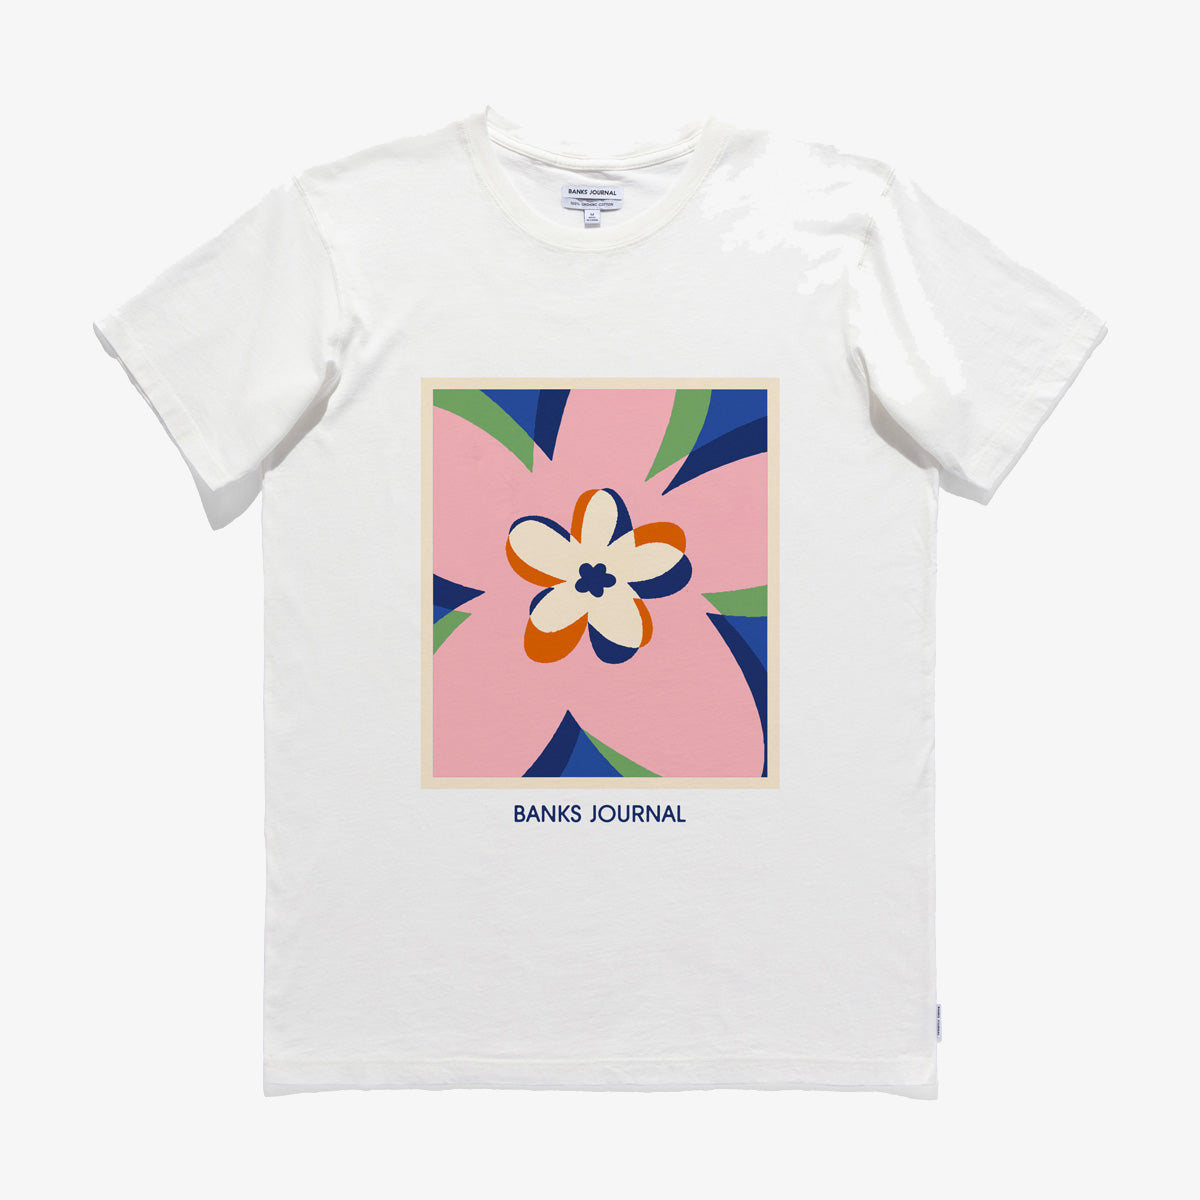 Candy Faded Tee Shirt